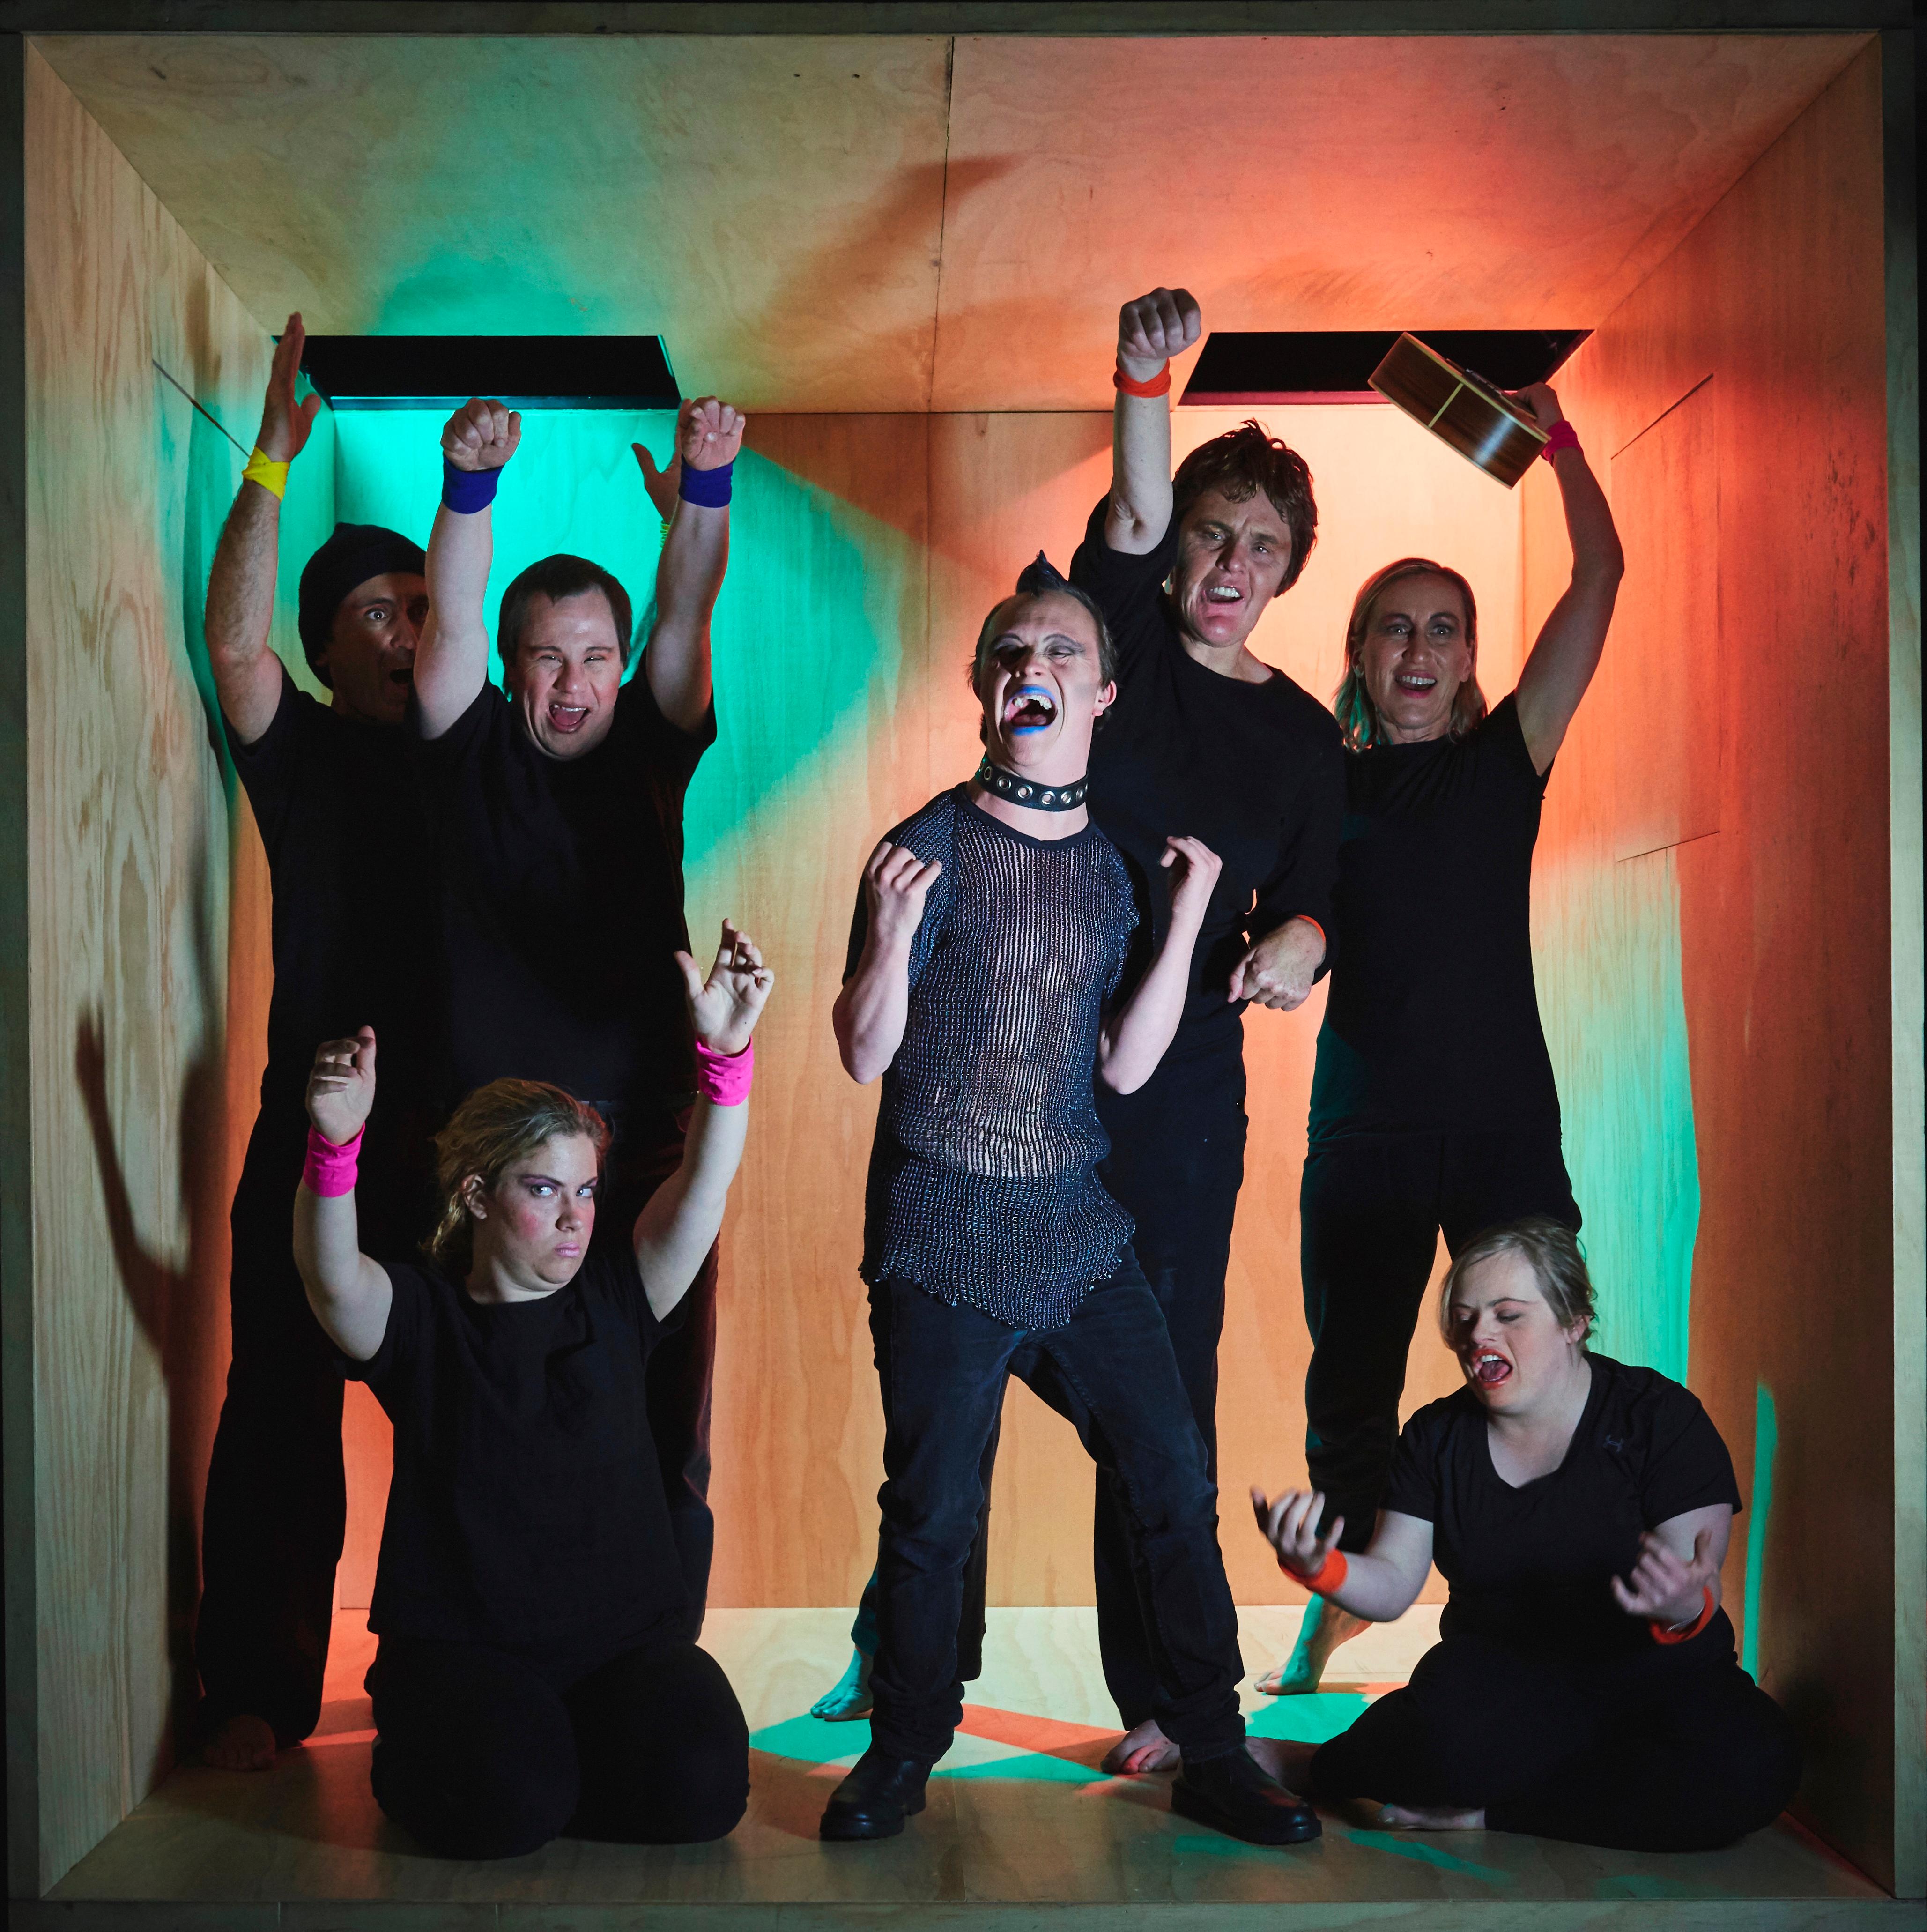 Seven people wearing dark clothing with neon armbands around their wrists yelling in unison. They stand in a large wooden performance box, around a mane with a sharp dog collar and spiky hair, looking punk rock!